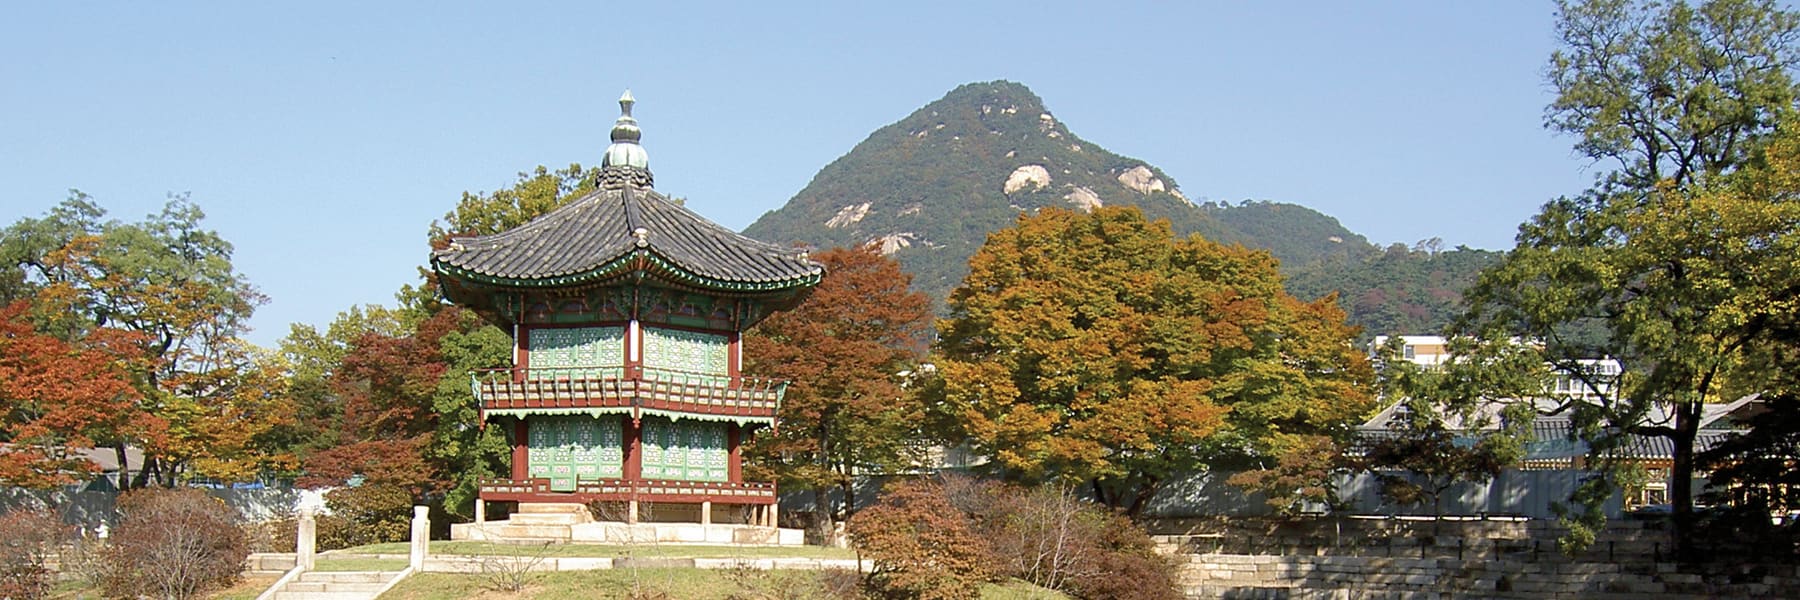 Korean Temple in front of a mountain.